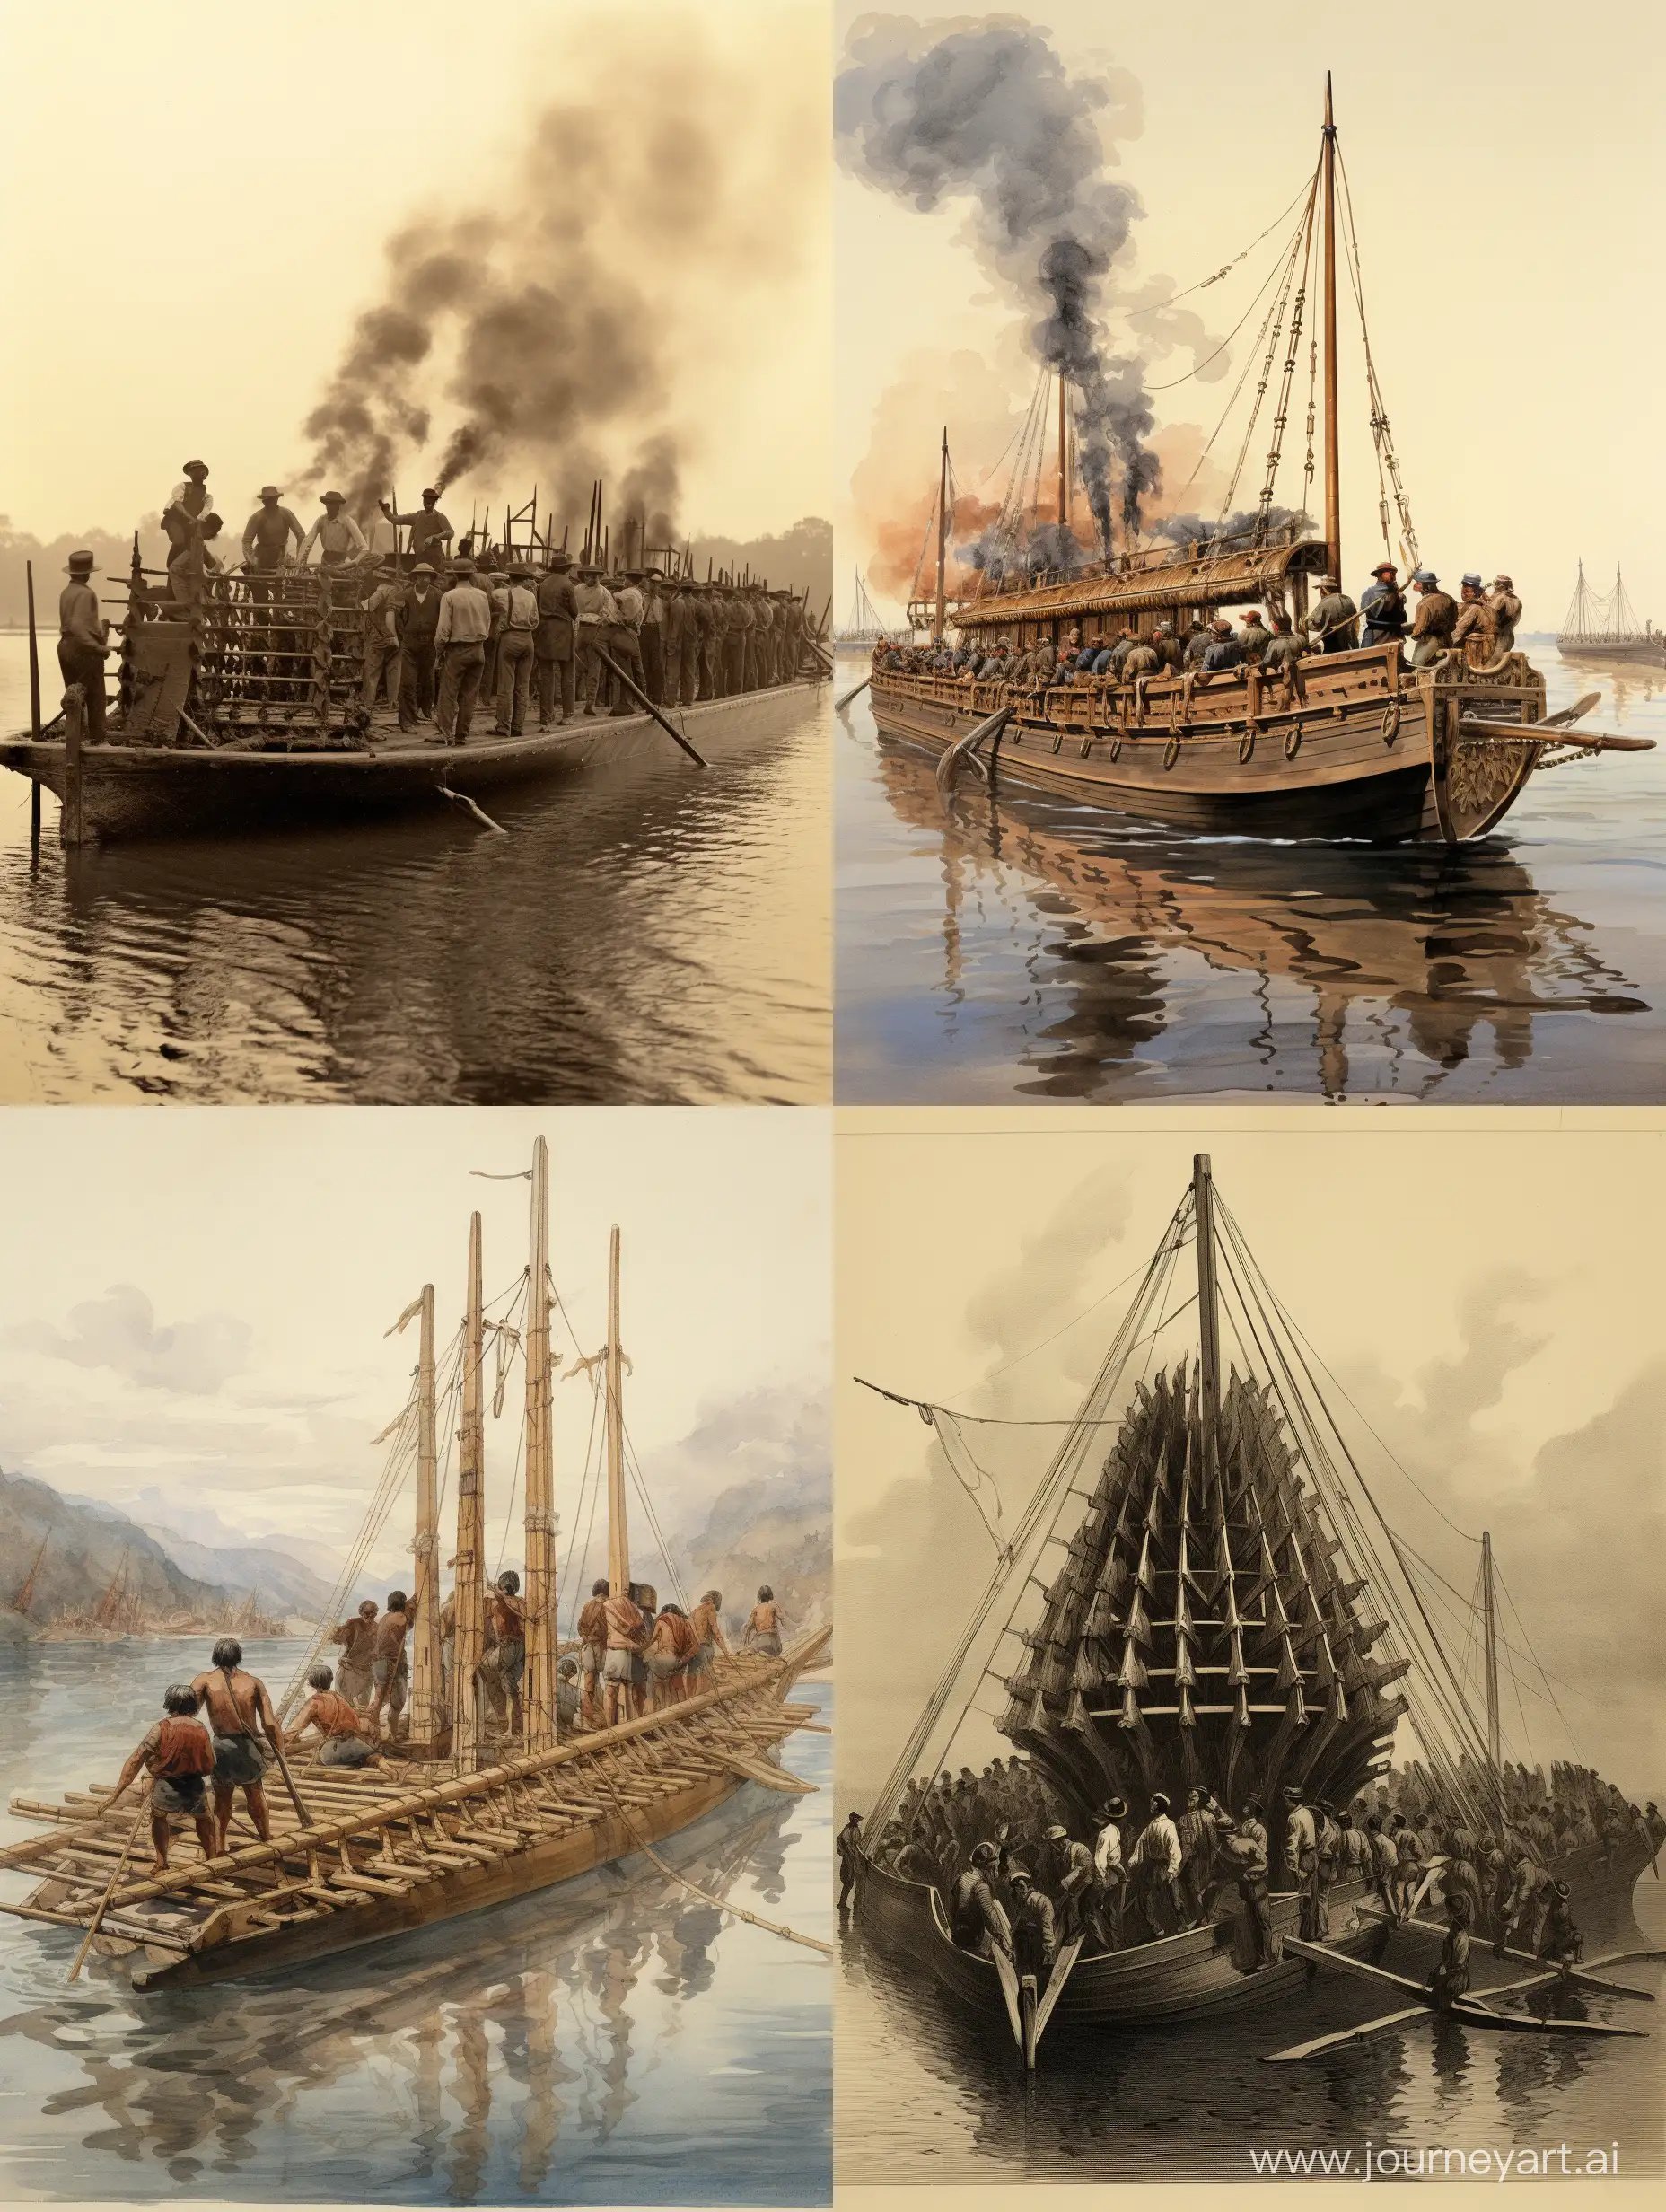 Epic-Battle-Victory-Fiery-Combat-Wooden-Boat-and-the-Decisive-War-Triumph